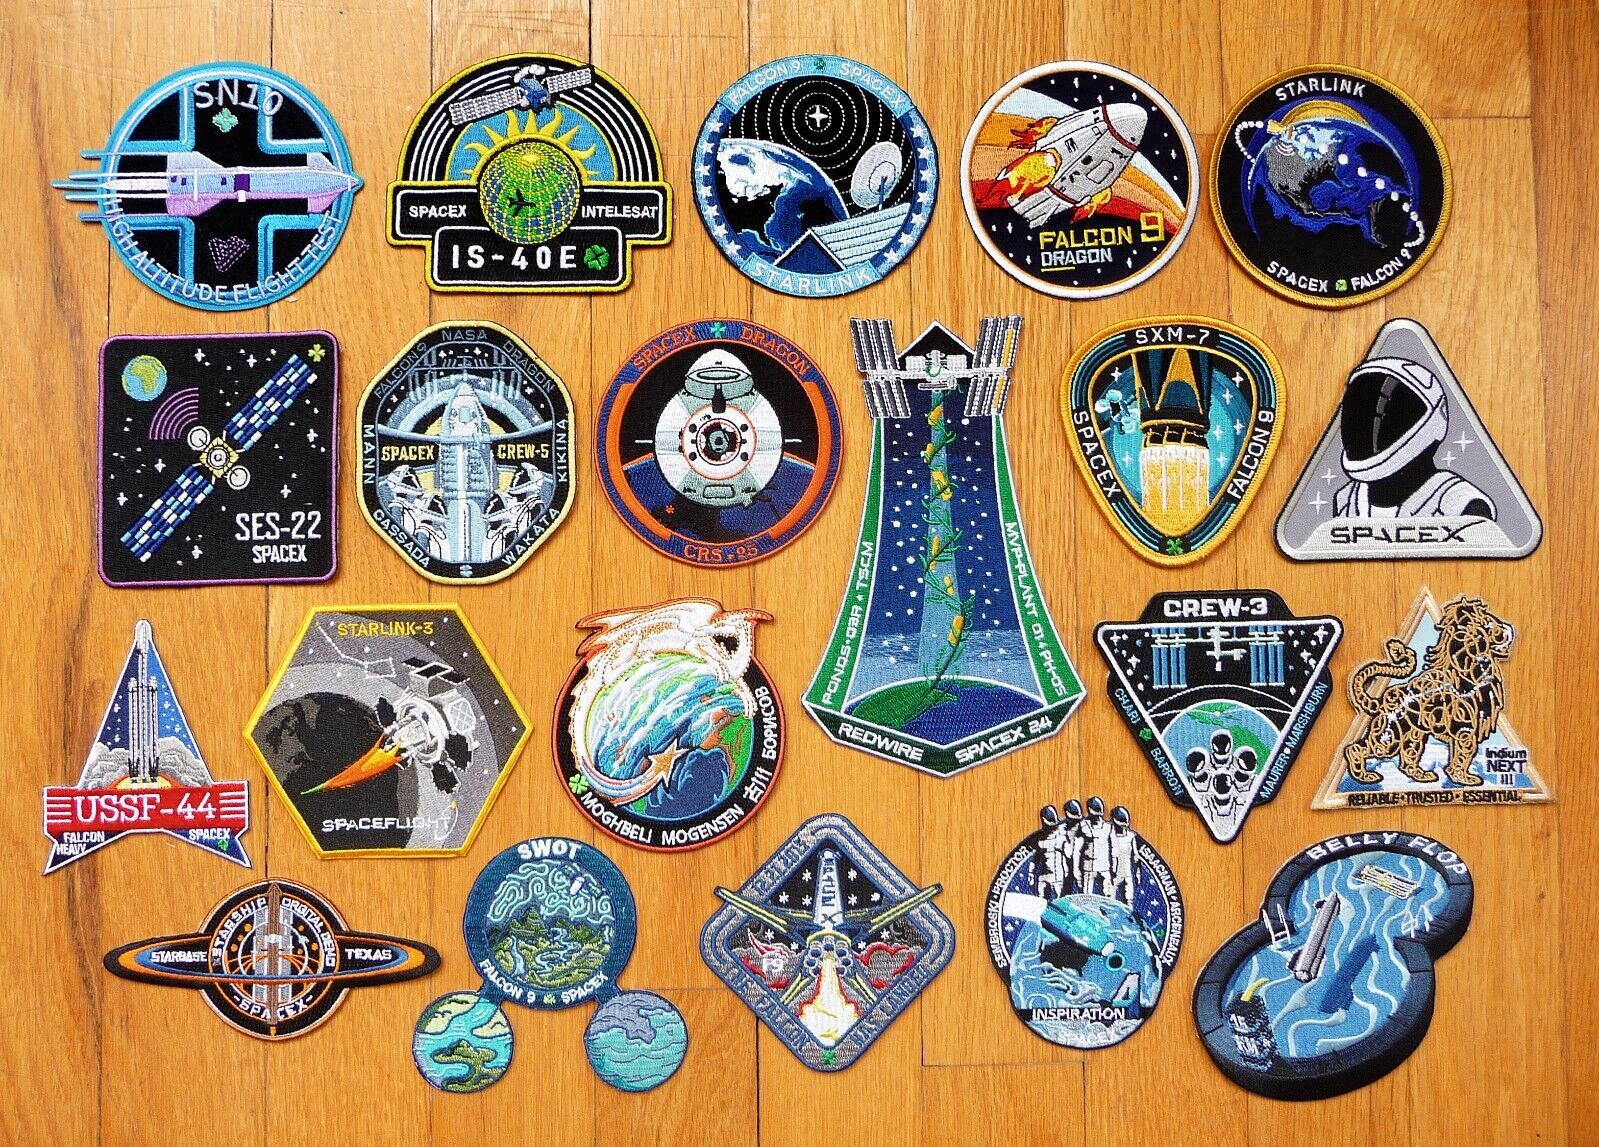 Set of 21 Original SpaceX/NASA Mission Patches